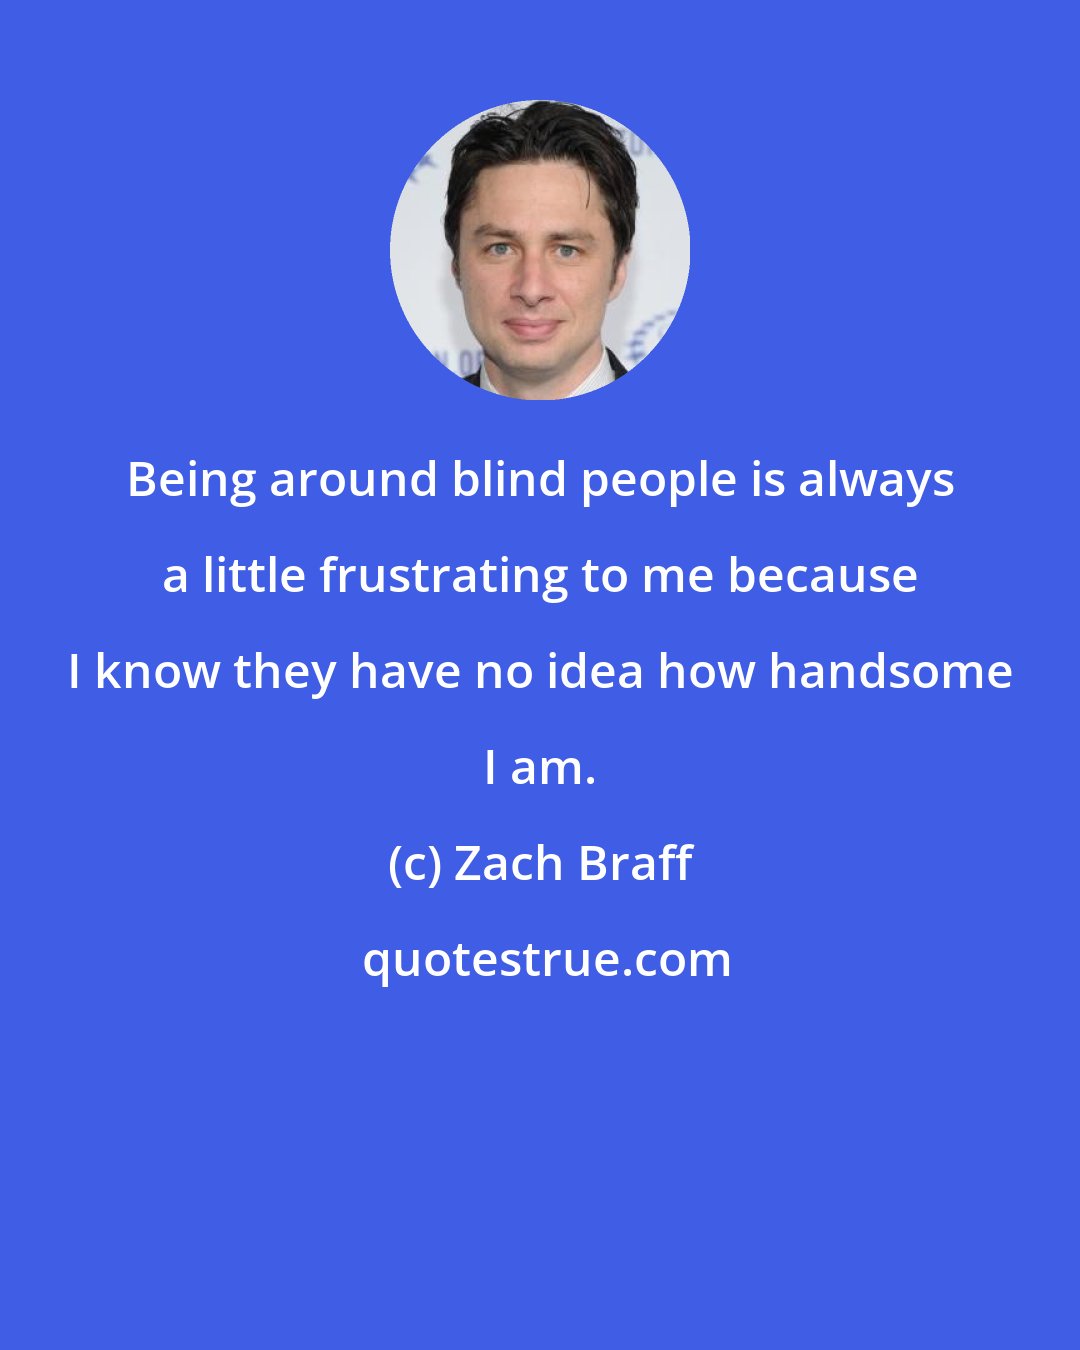 Zach Braff: Being around blind people is always a little frustrating to me because I know they have no idea how handsome I am.